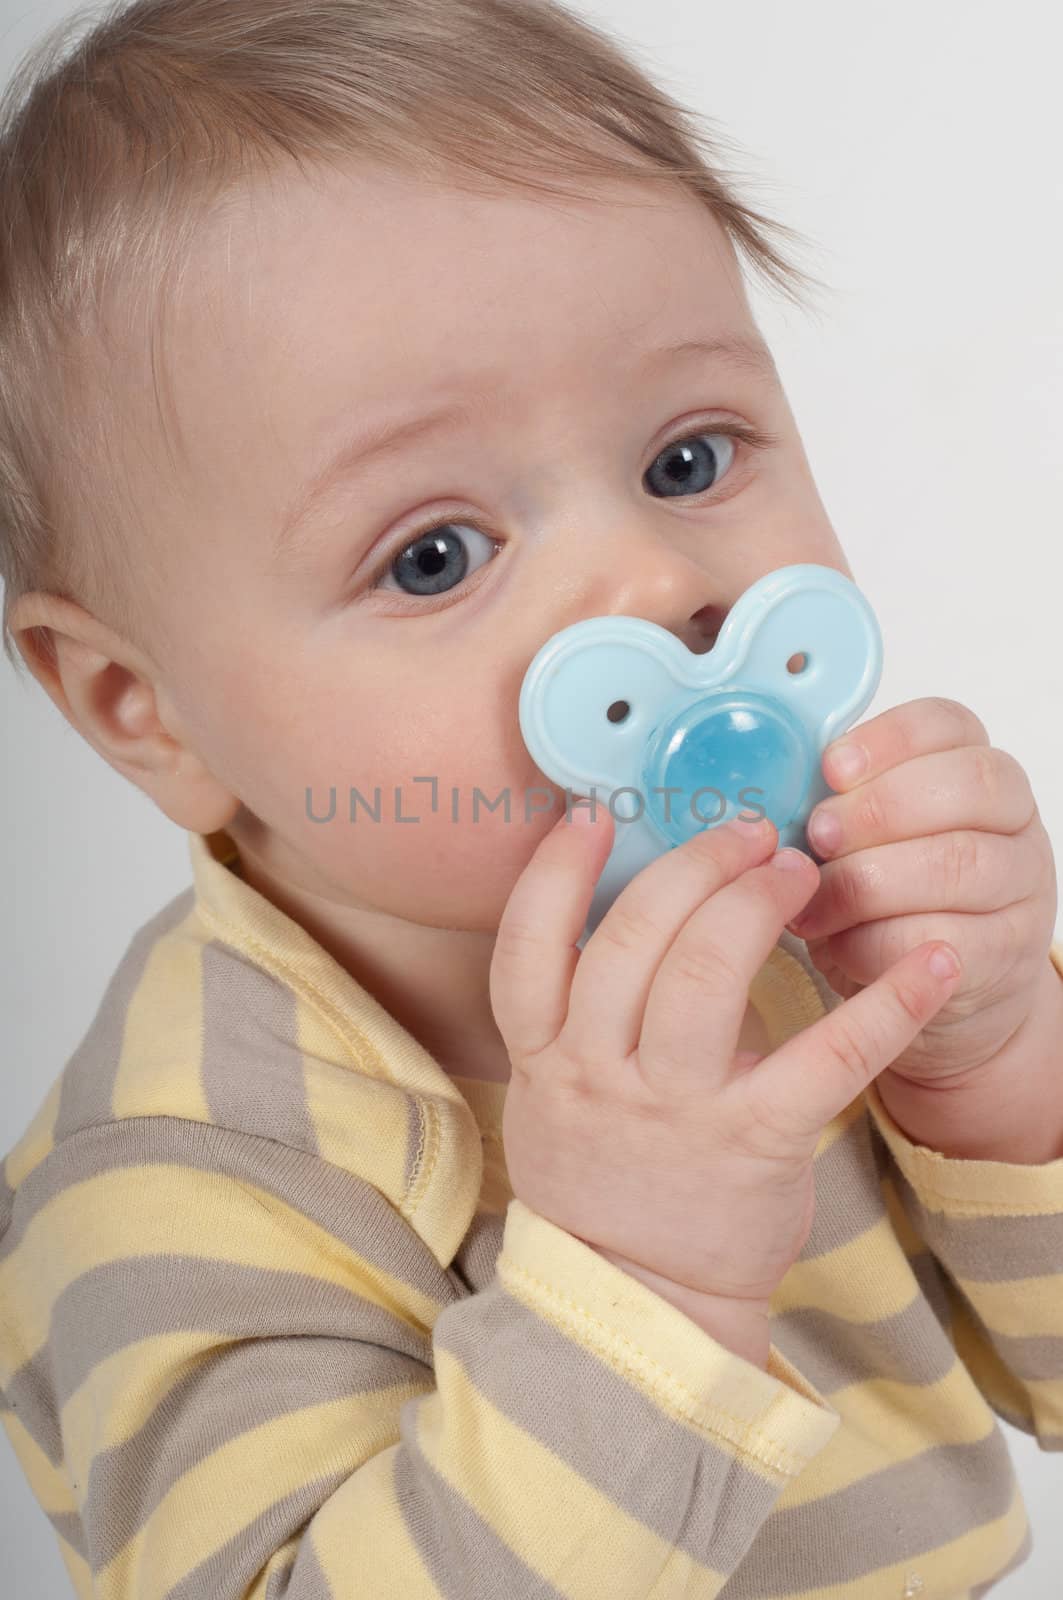 Little cute boy in striped top with teething ring